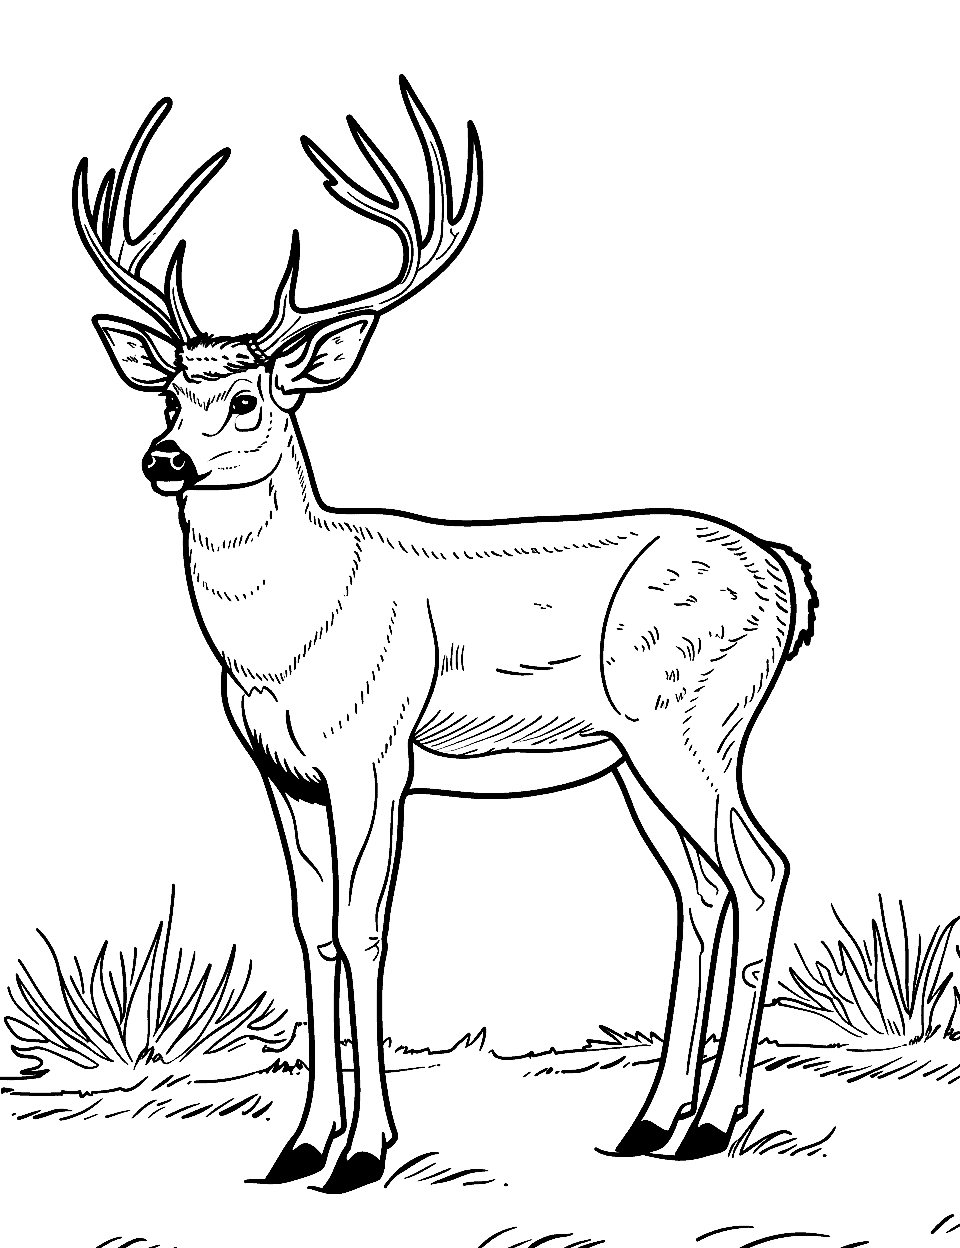 Buck with Majestic Antlers Coloring Page - A buck standing tall, showcasing its impressive antlers.